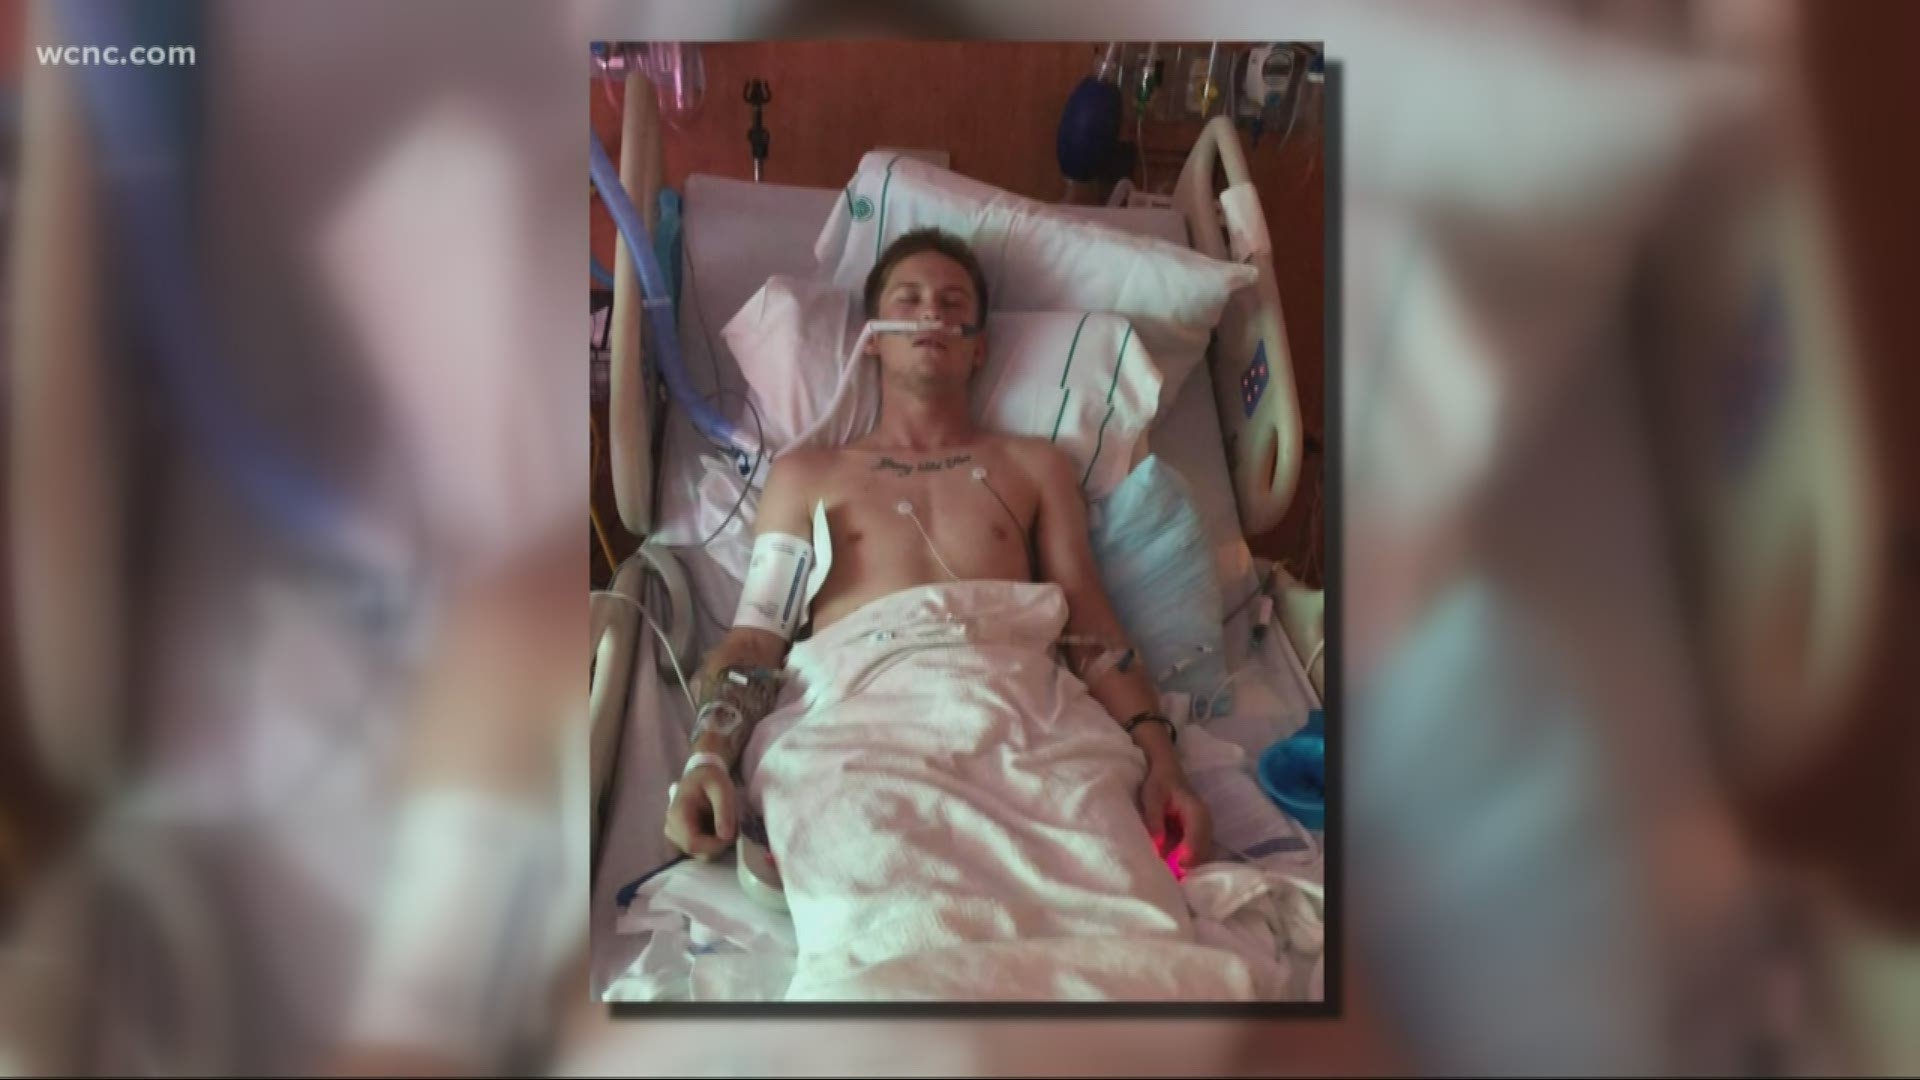 A 17-year-old wound up in the hospital for days after using a vape pen. Now his mother is warning other parents.